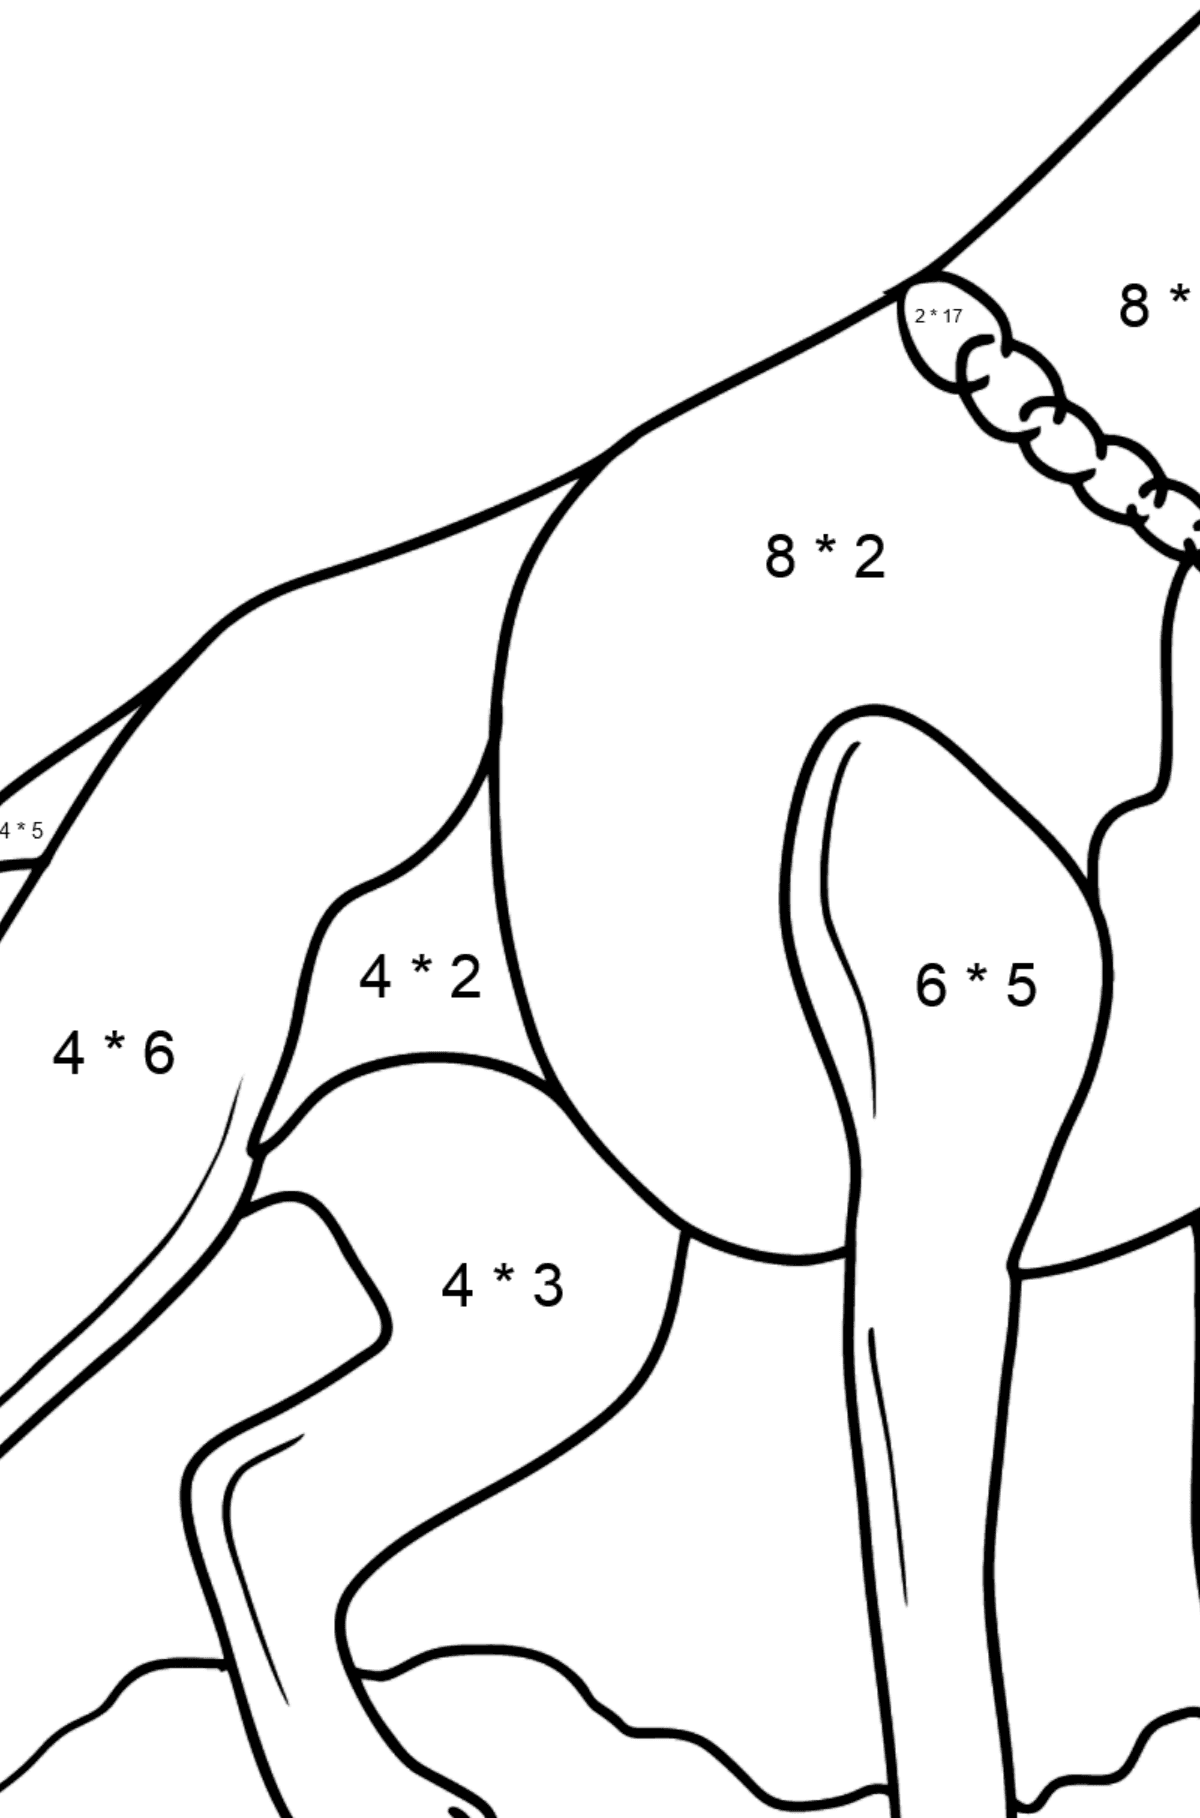 Boxer Dog coloring page - Math Coloring - Multiplication for Kids